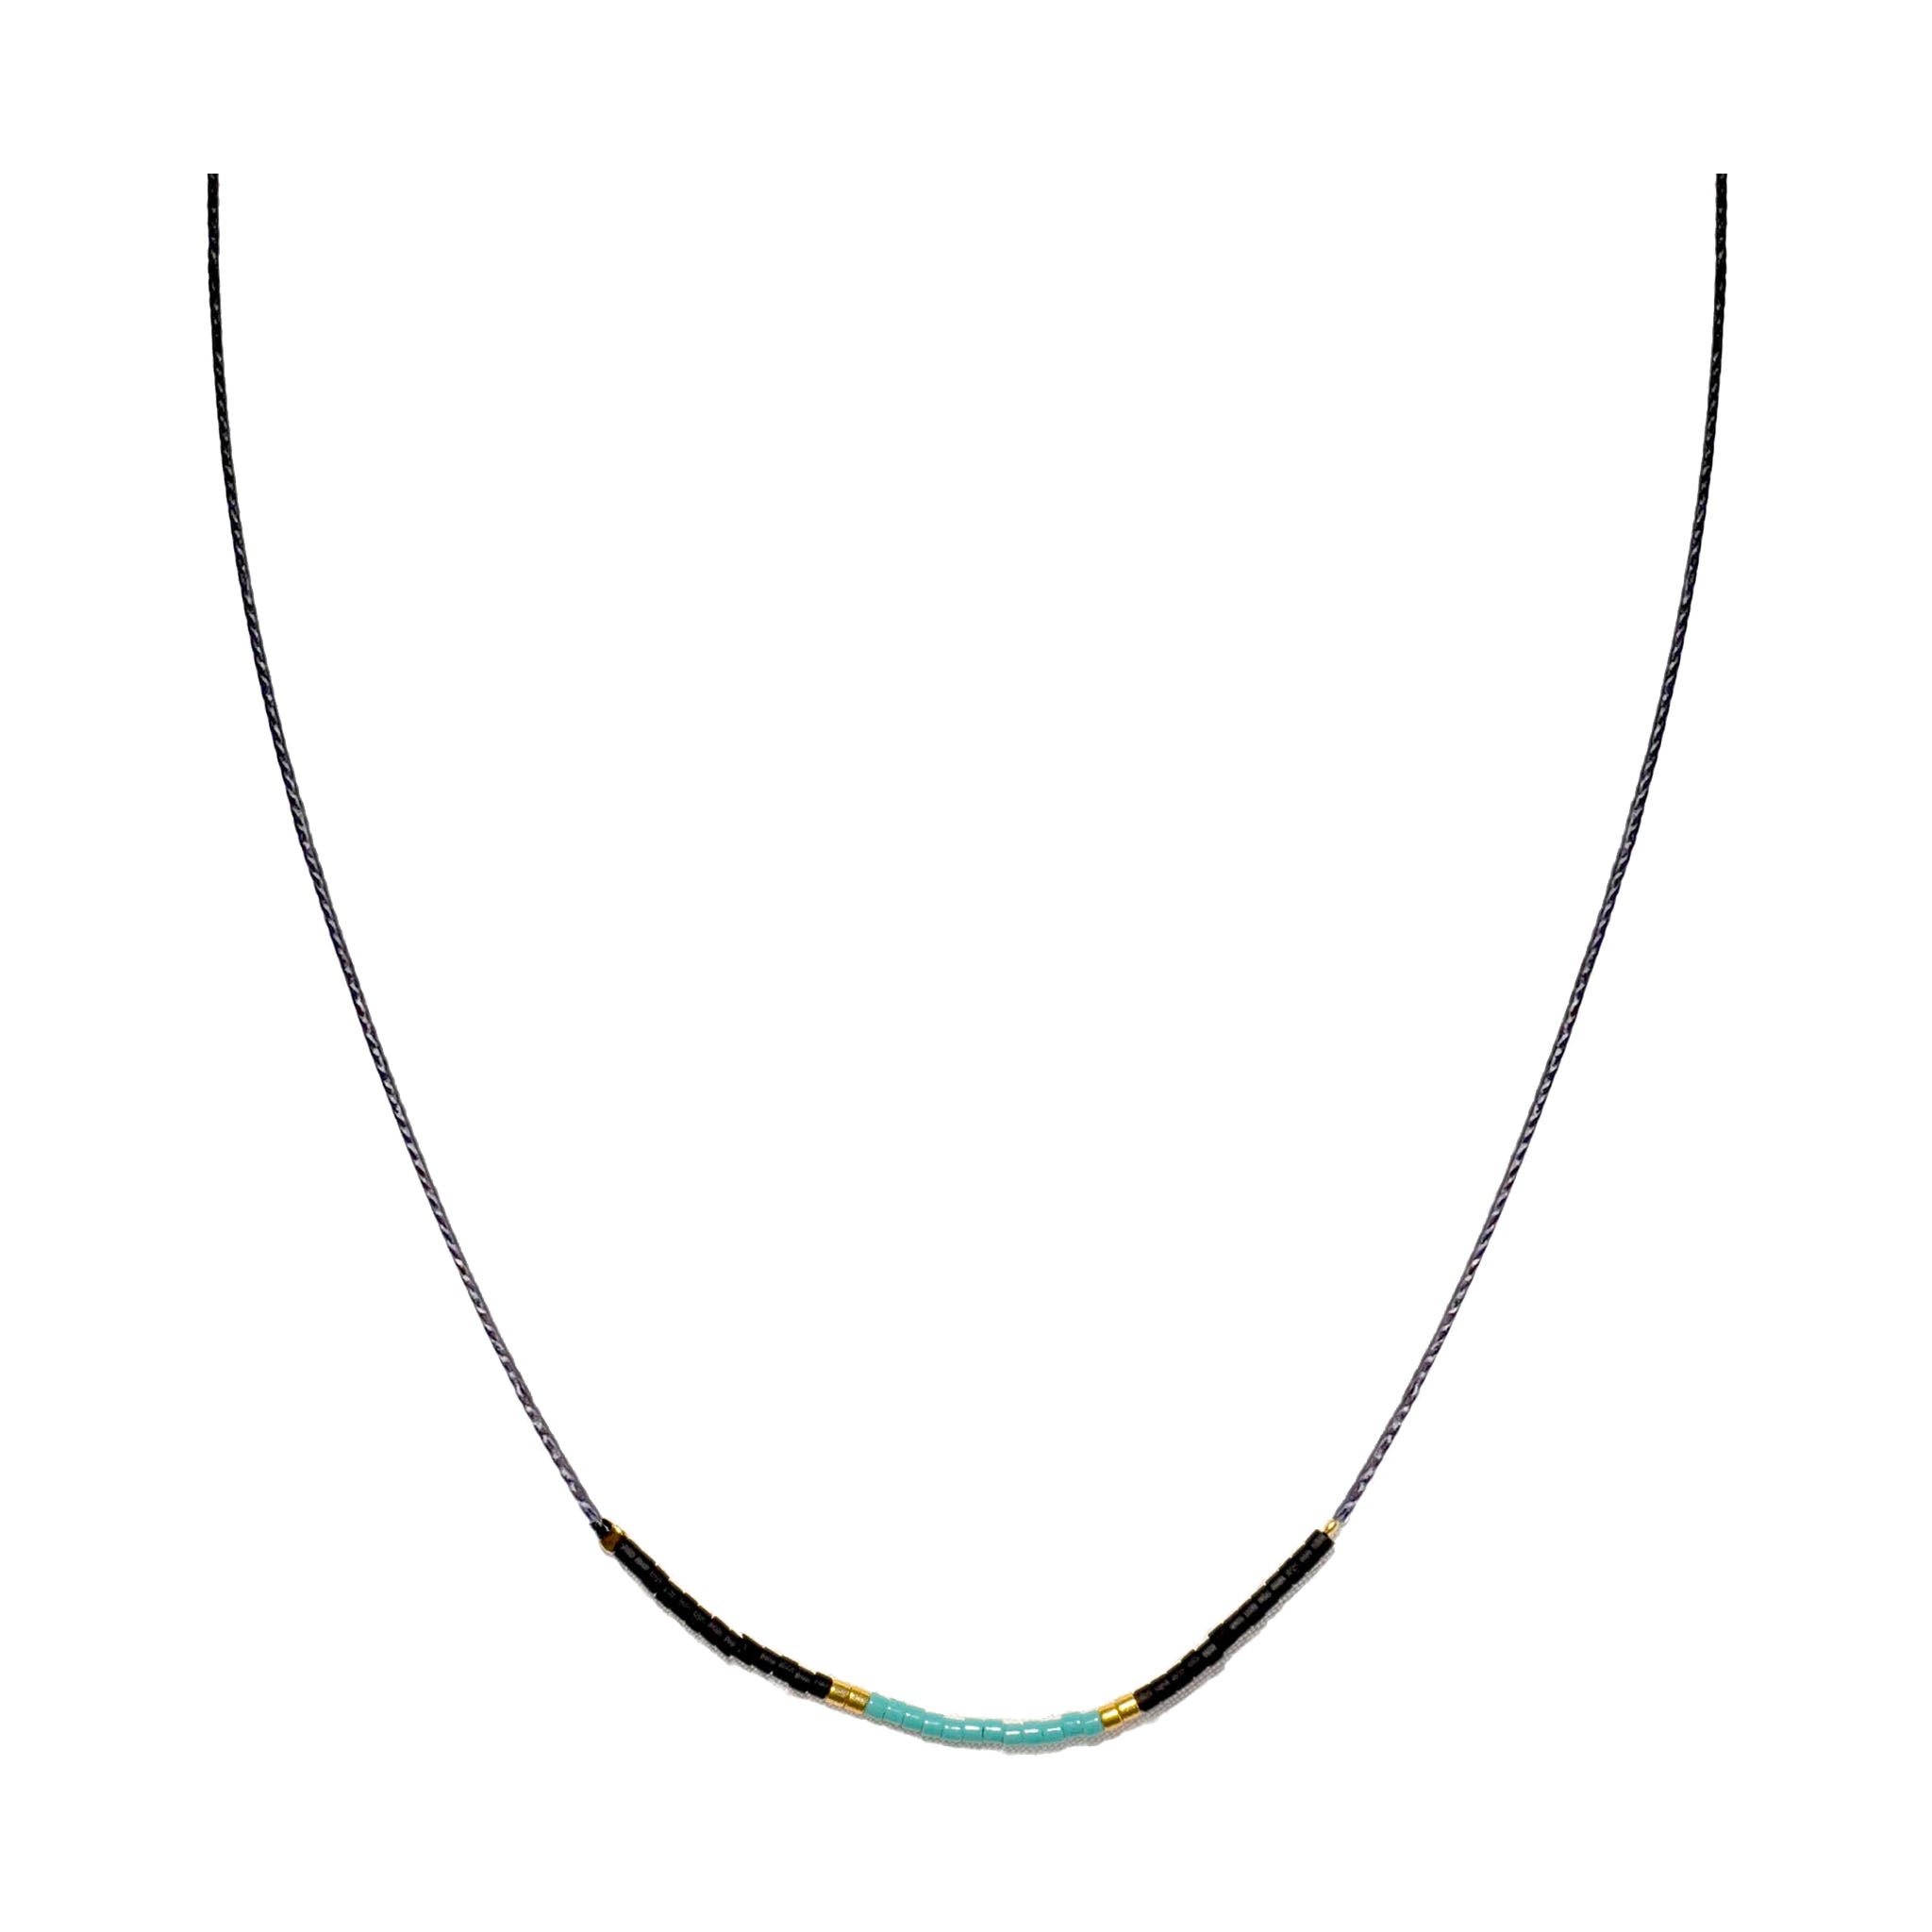 Intention Necklace - Turquoise/Black